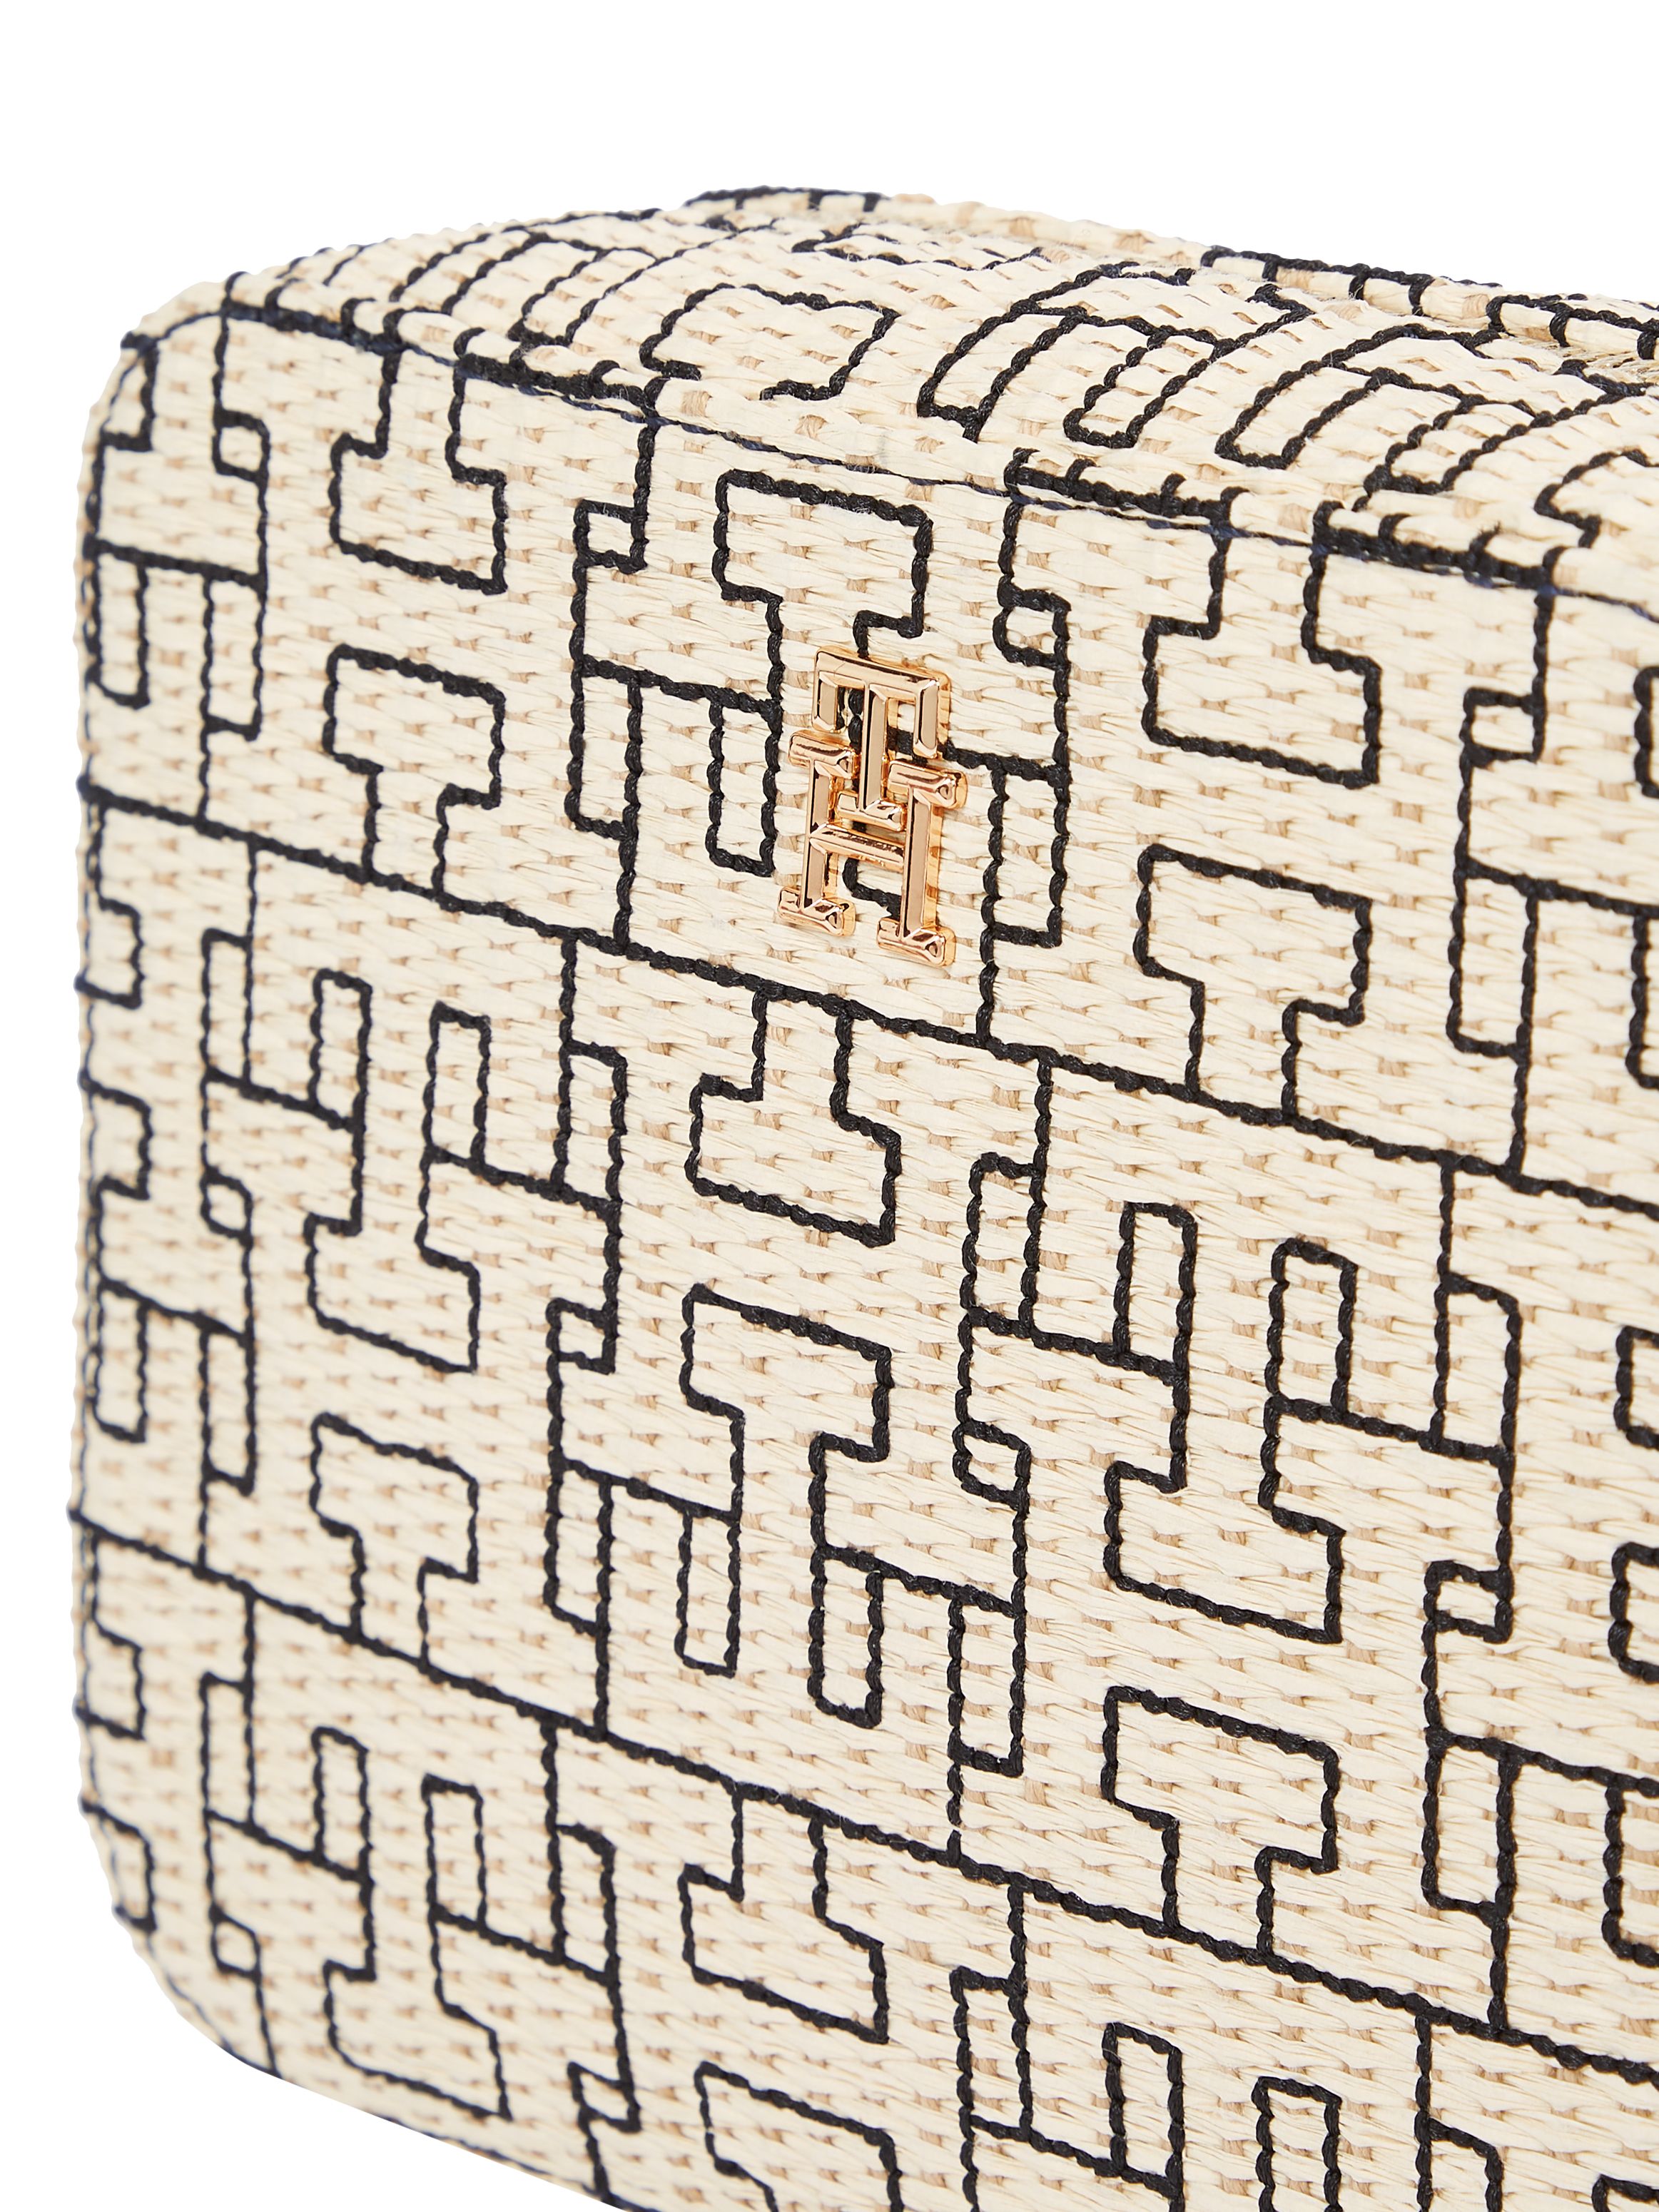 Tommy Hilfiger City Straw Embroidery Crossover Bag